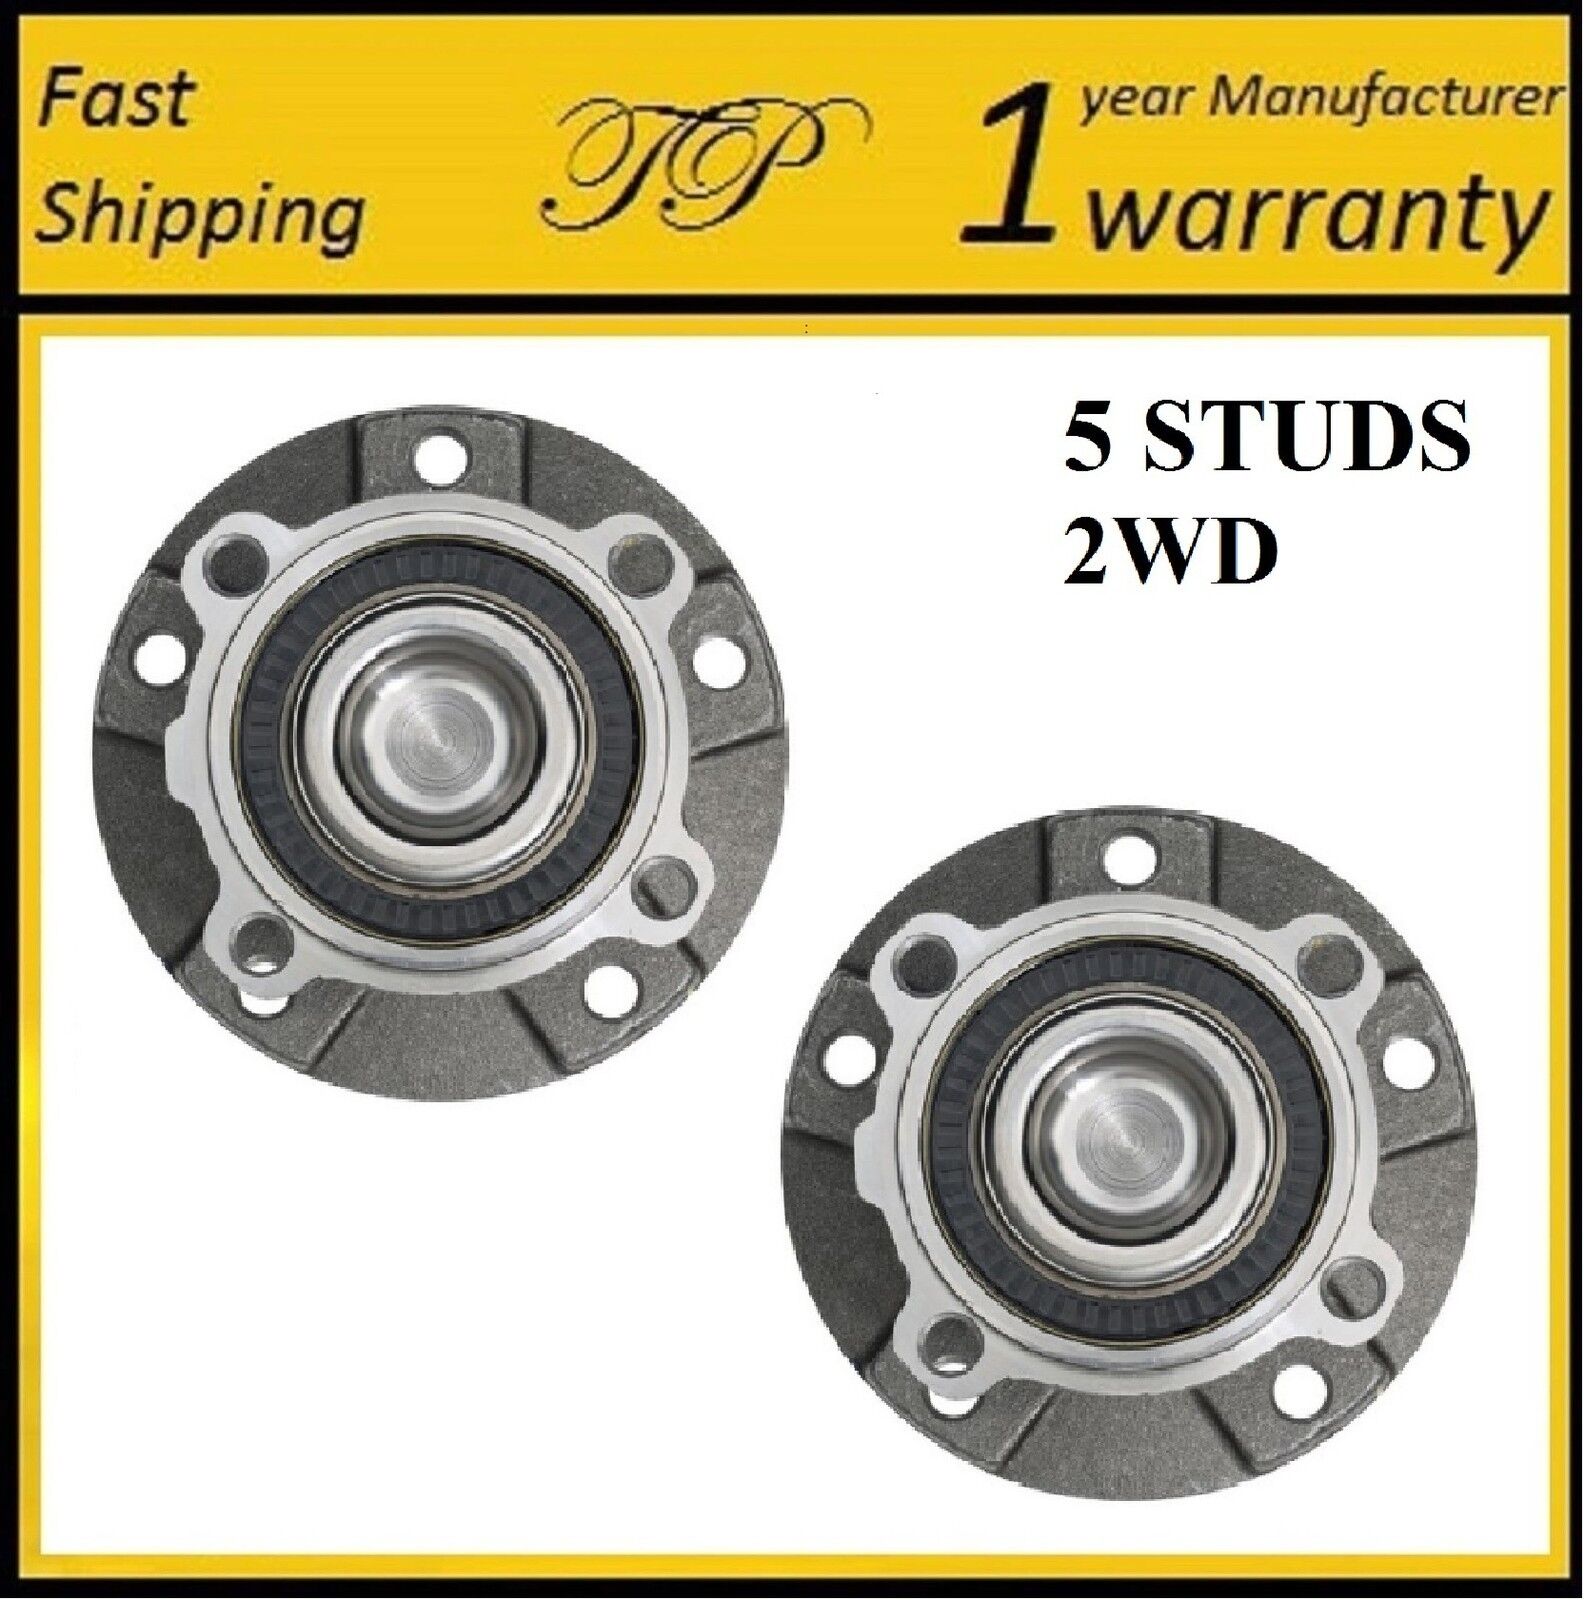 FRONT Wheel Hub Bearing Assembly For BMW 525I 2004-2007 (2WD) PAIR